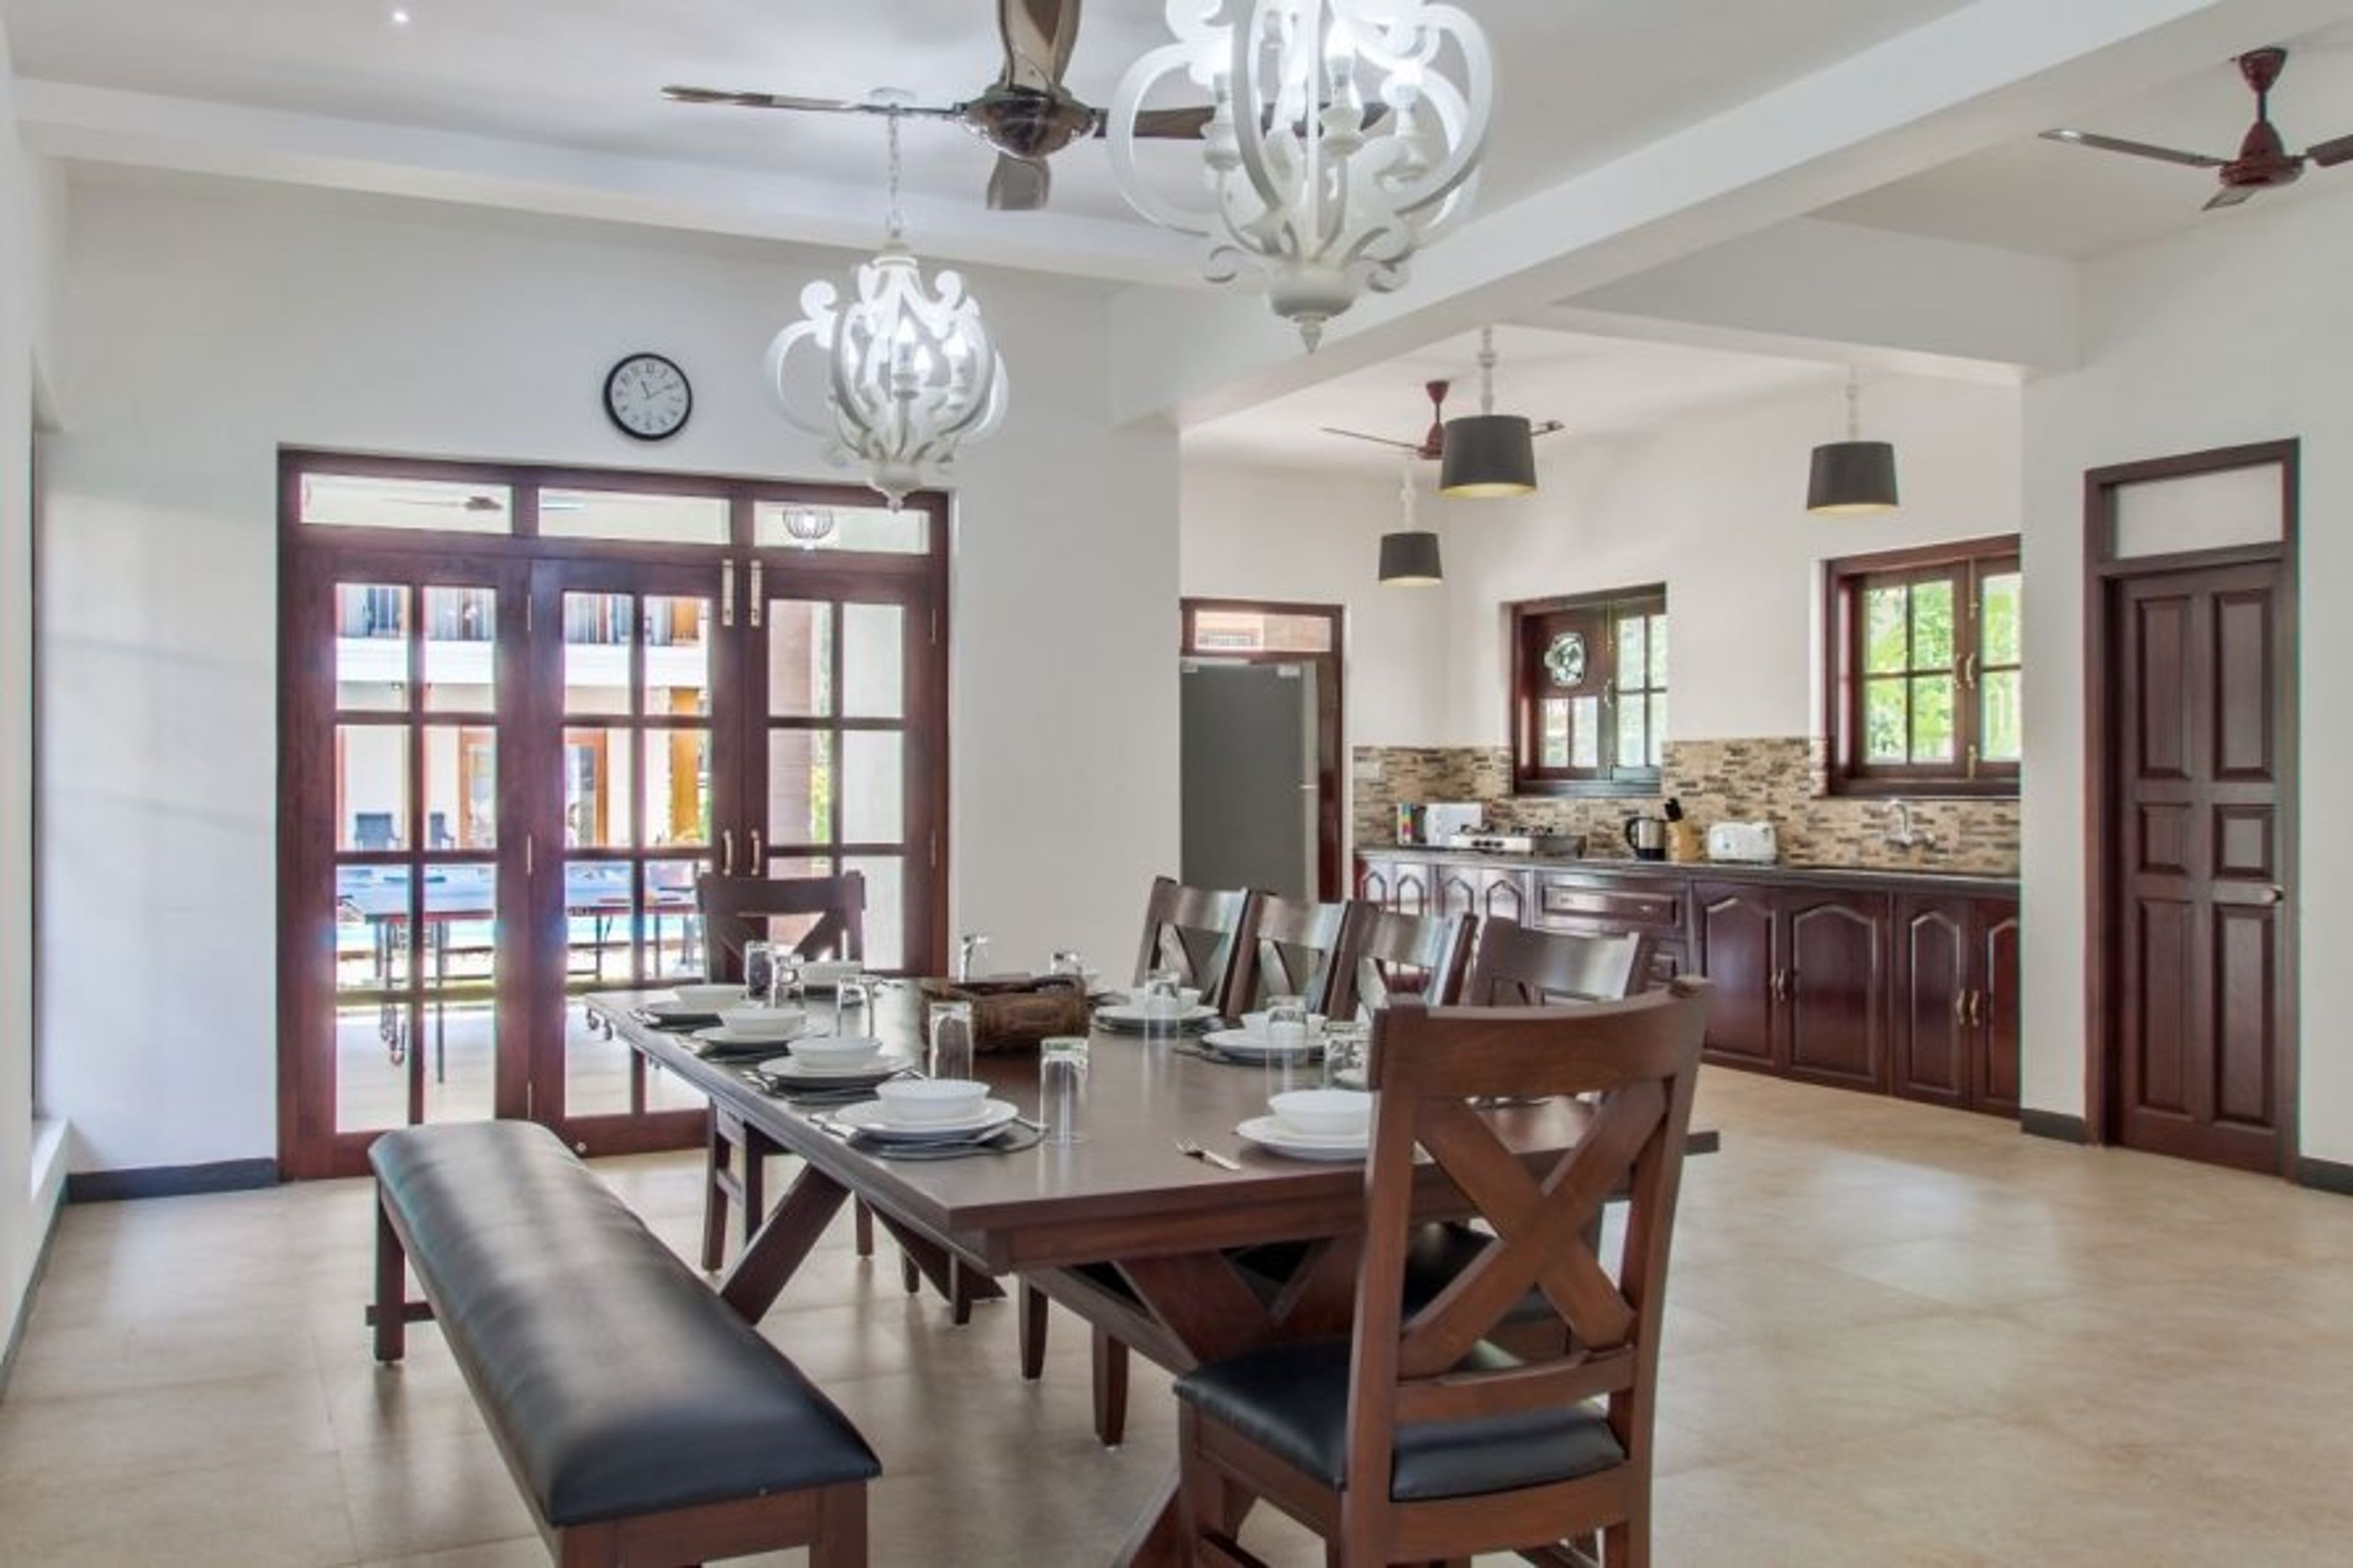 Well furnished villa for rent in Calangute